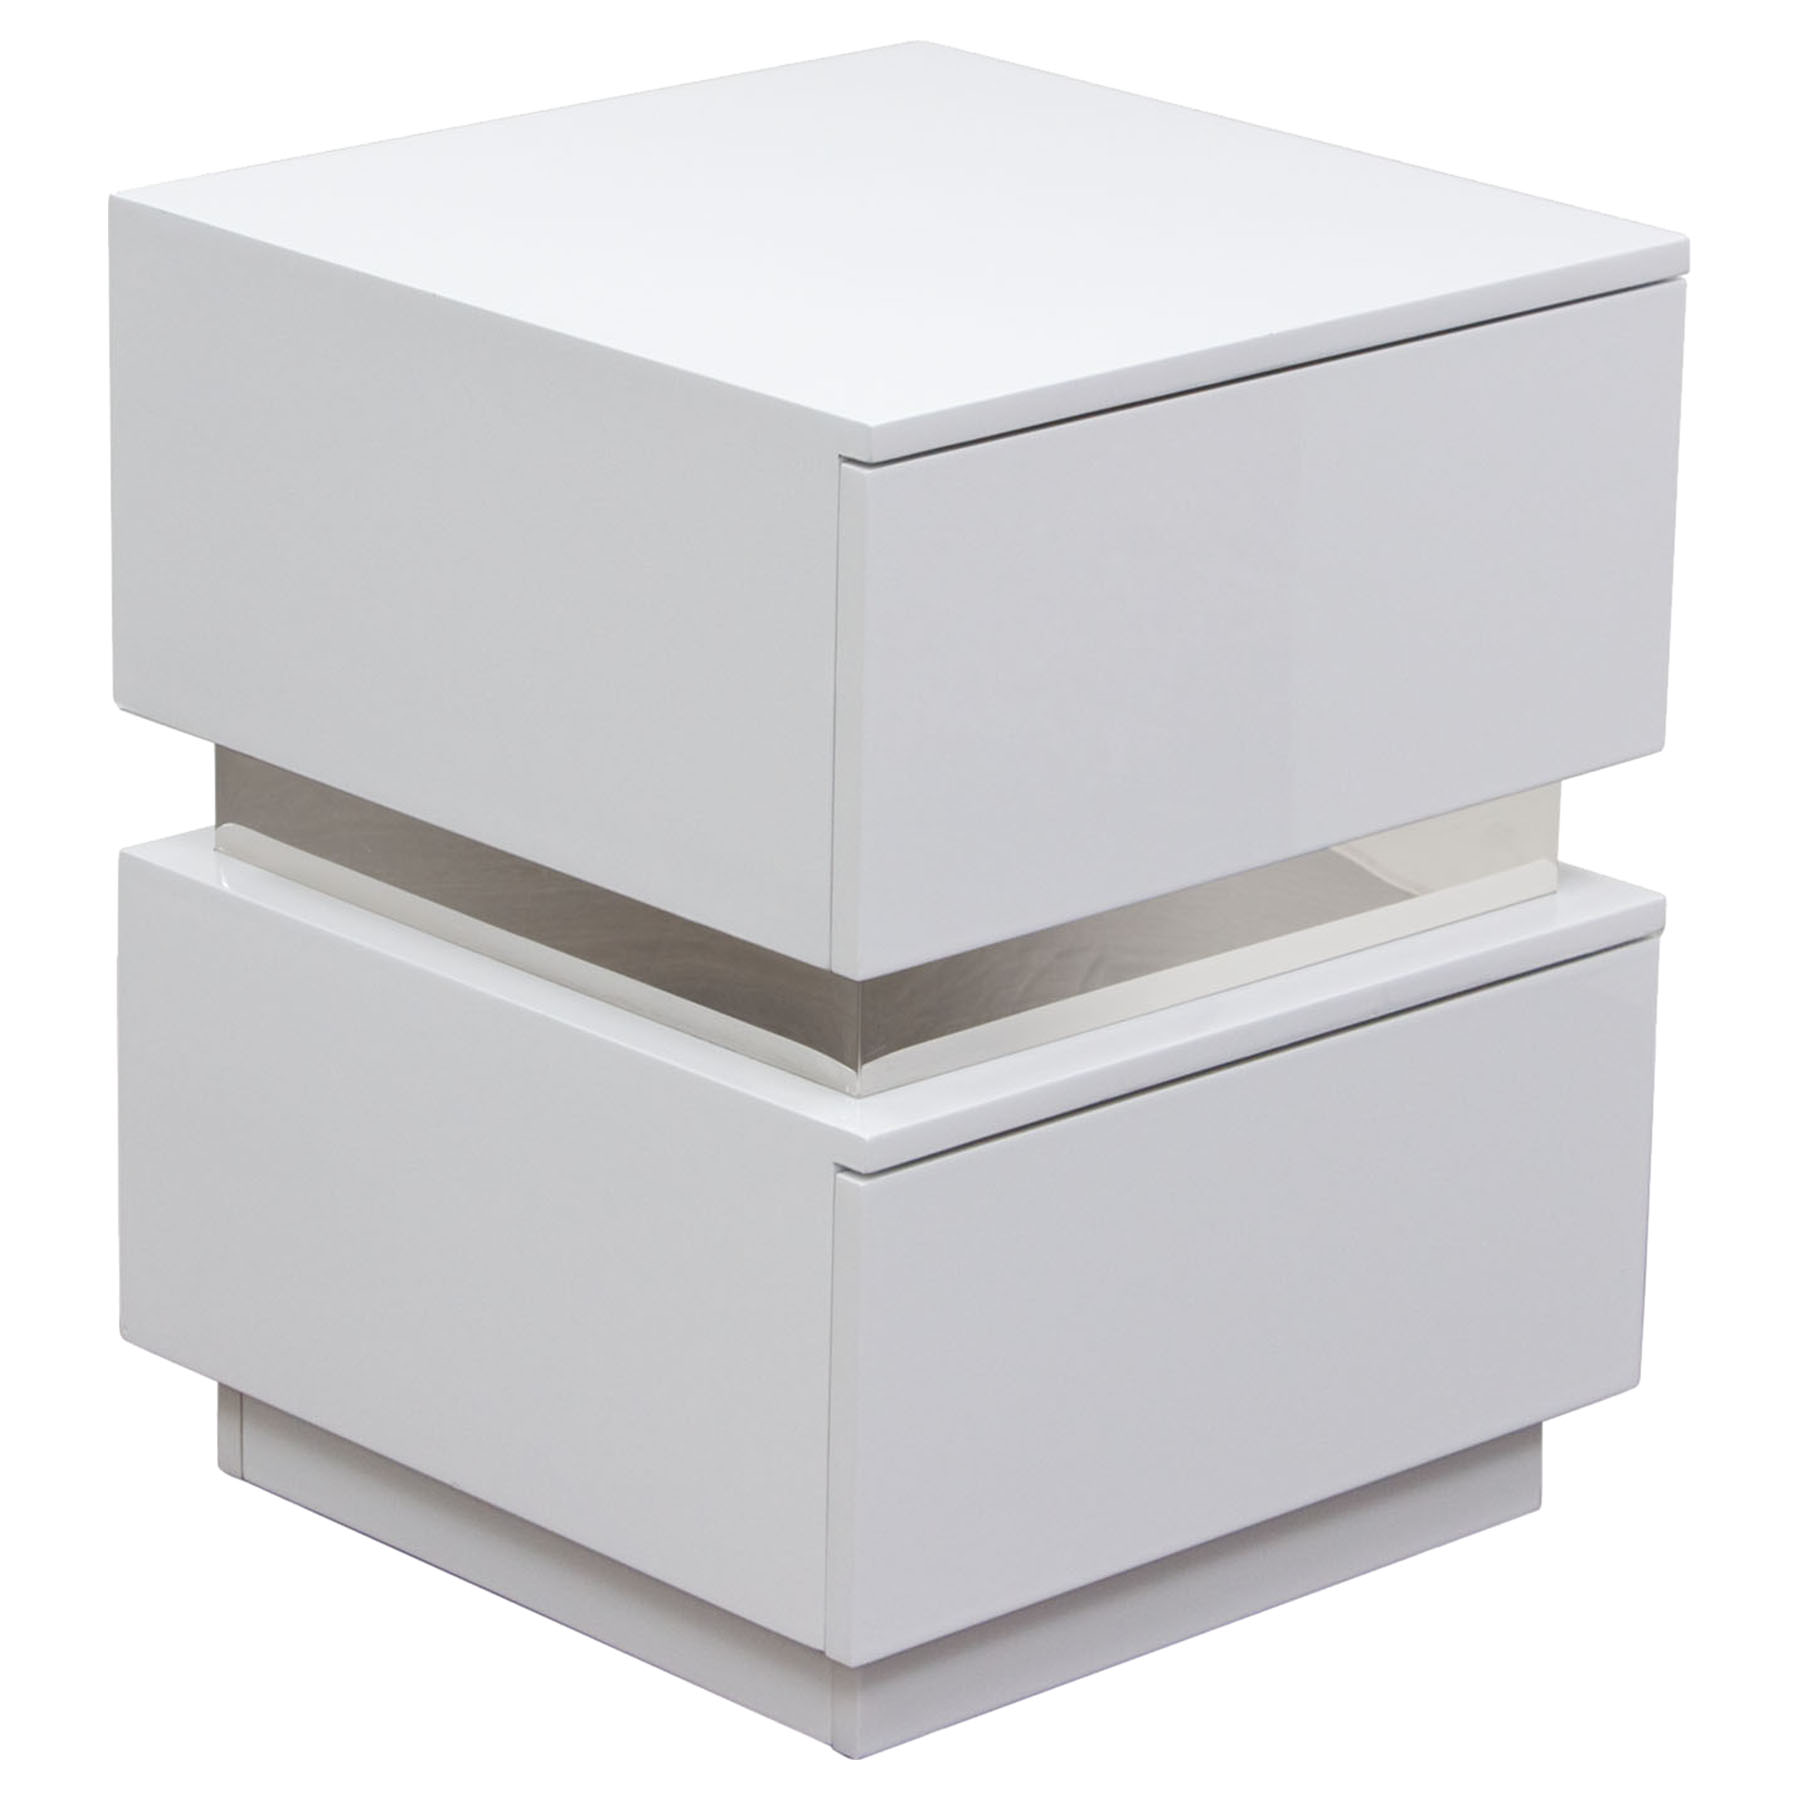 elle drawers accent table high gloss white dcg ellenswh with round drum end ikea closet organizer reasonably furniture seat for drums bar style large umbrella ashley king size